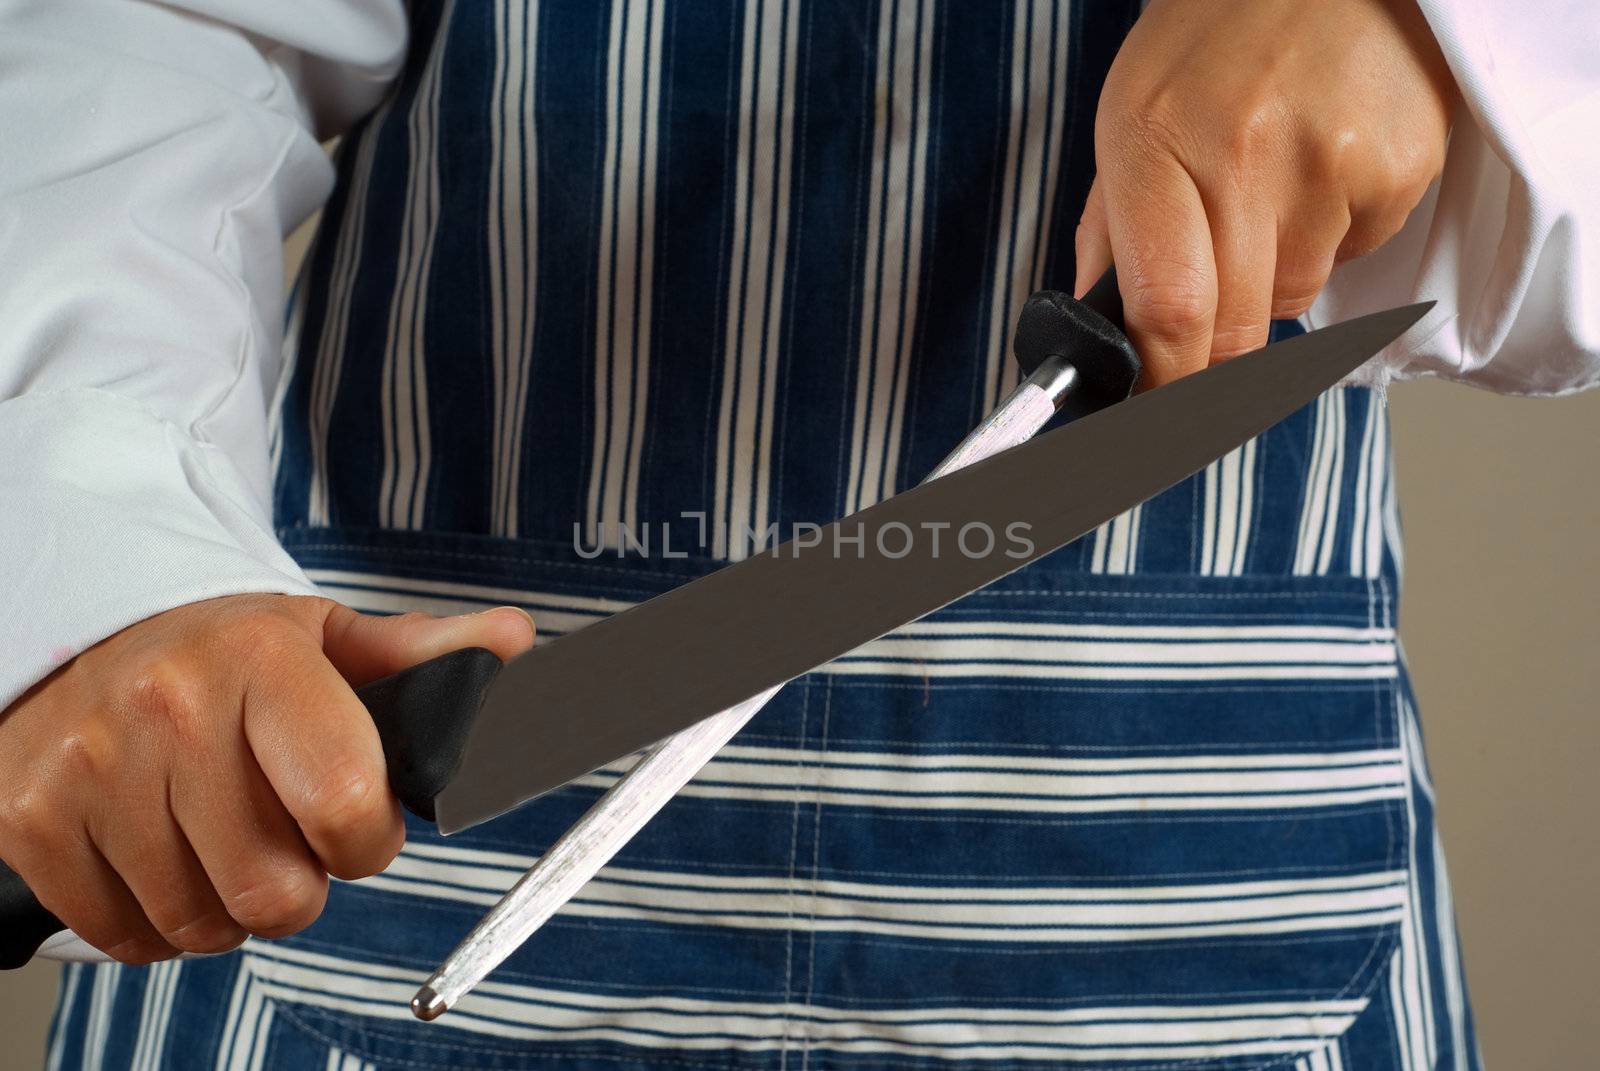 Woman chef sharpening knif by alistaircotton